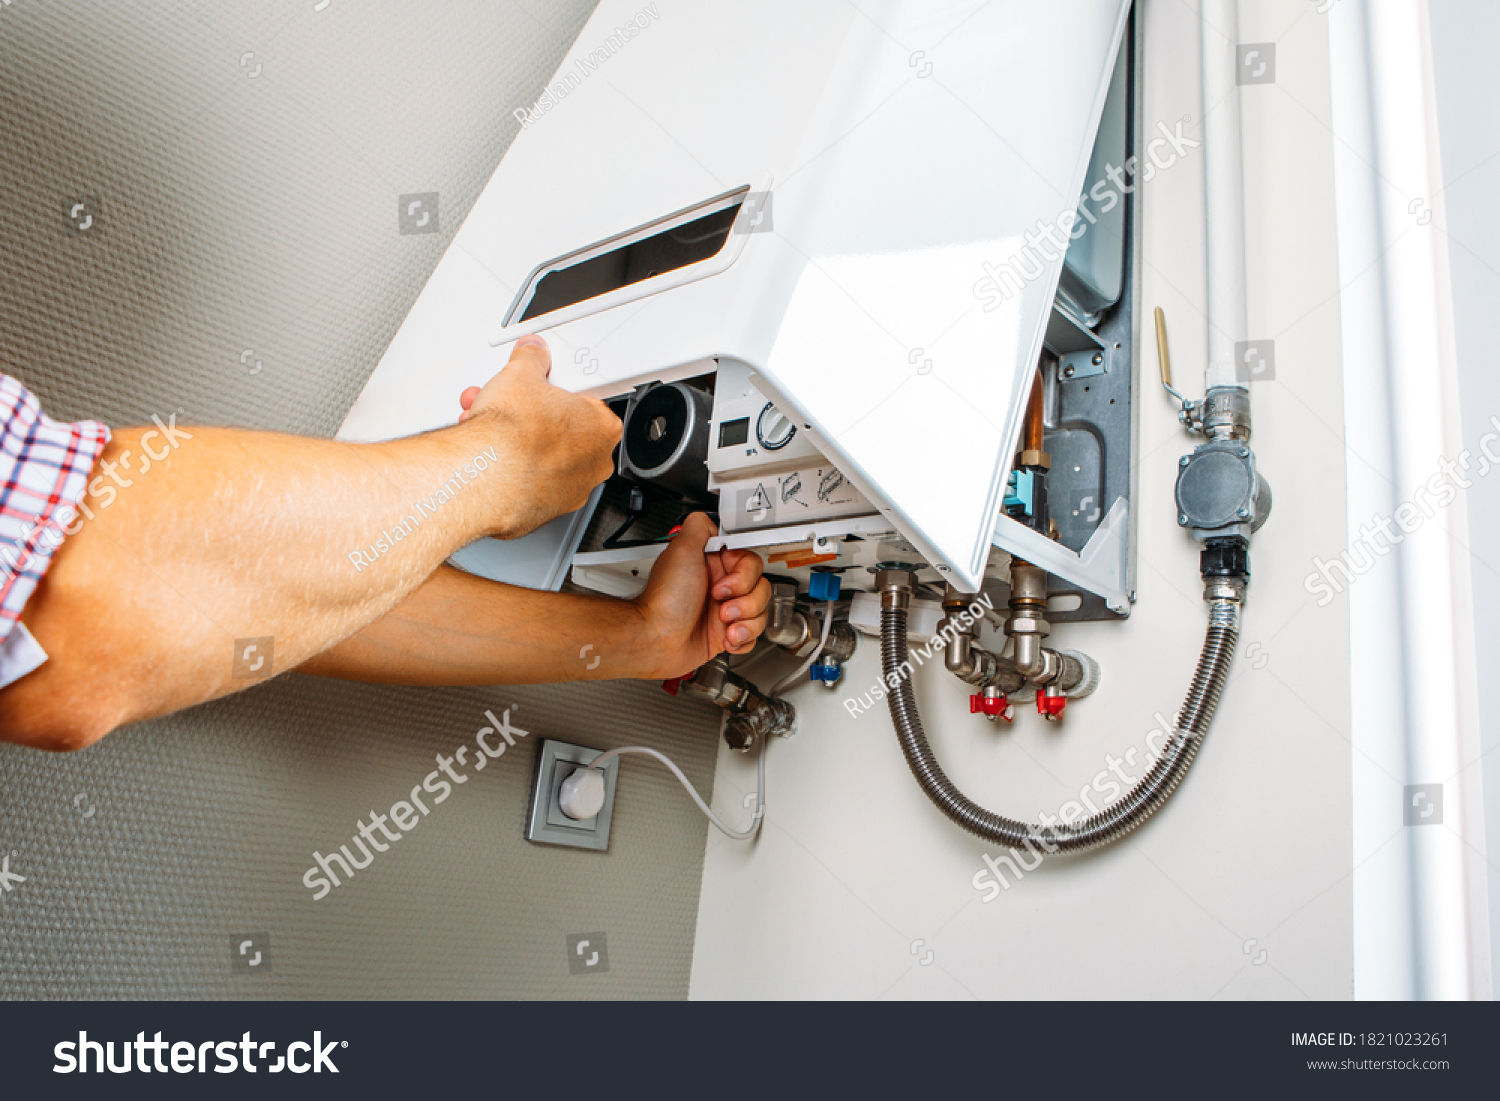 Plumber attaches Trying To Fix the Problem with the Residential Heating Equipment. Repair of a gas boiler #1821023261